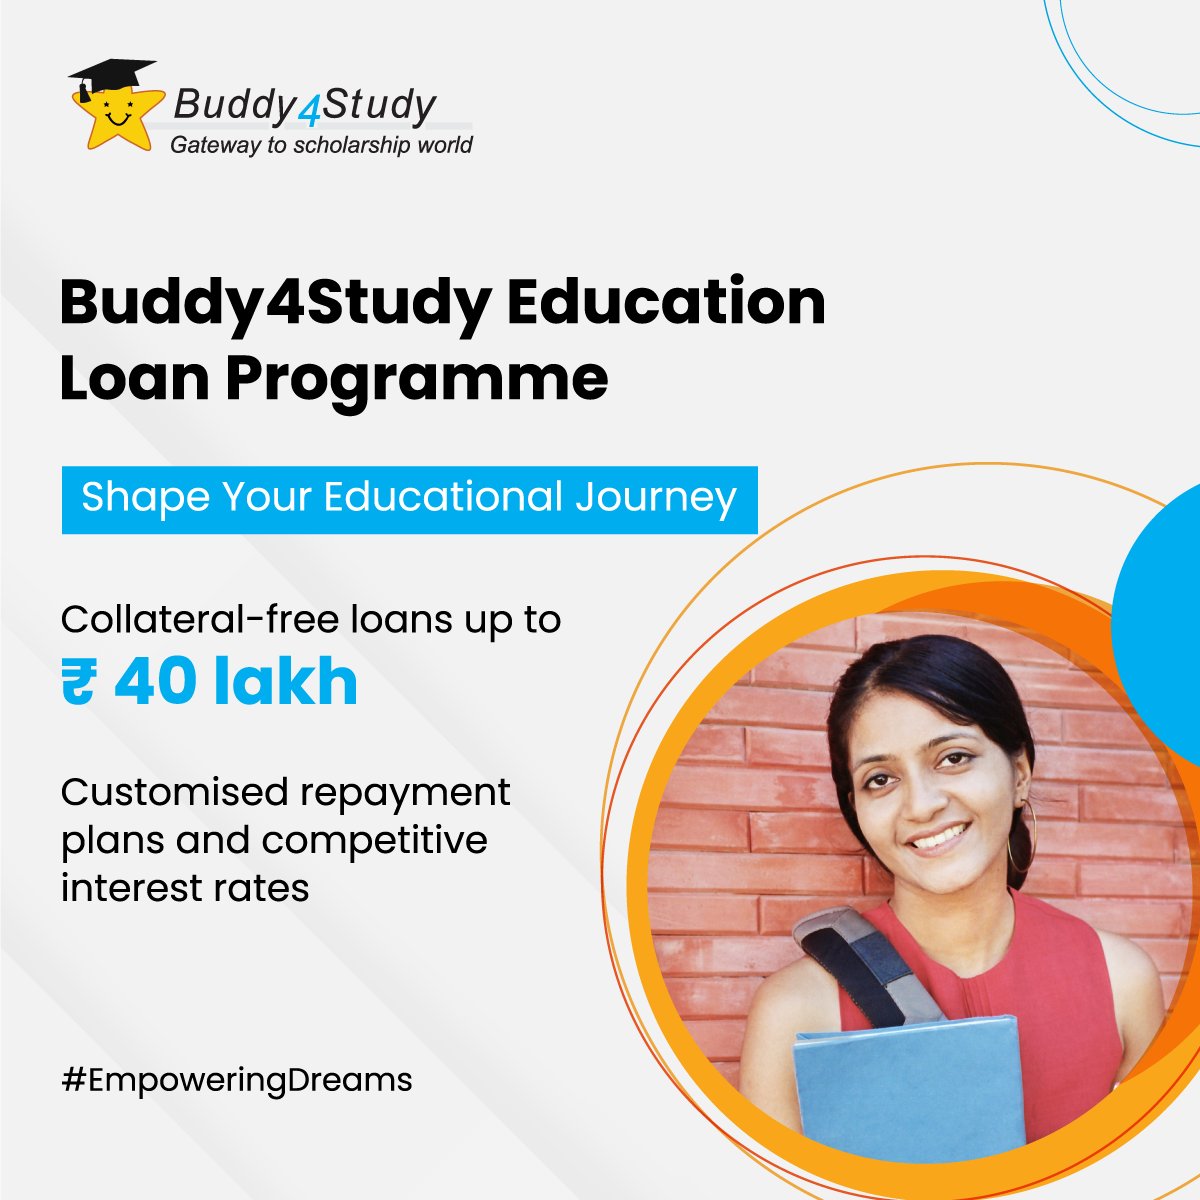 Avail collateral-free loans up to ₹ 40 lakh for your higher studies with the Buddy4Study Education Loan Programme. Competitive interest rates starting from 8.1%. Apply now. b4s.in/a/tt_LOAN1_202… 

#EducationLoan #Buddy4Study #EmpoweringDreams